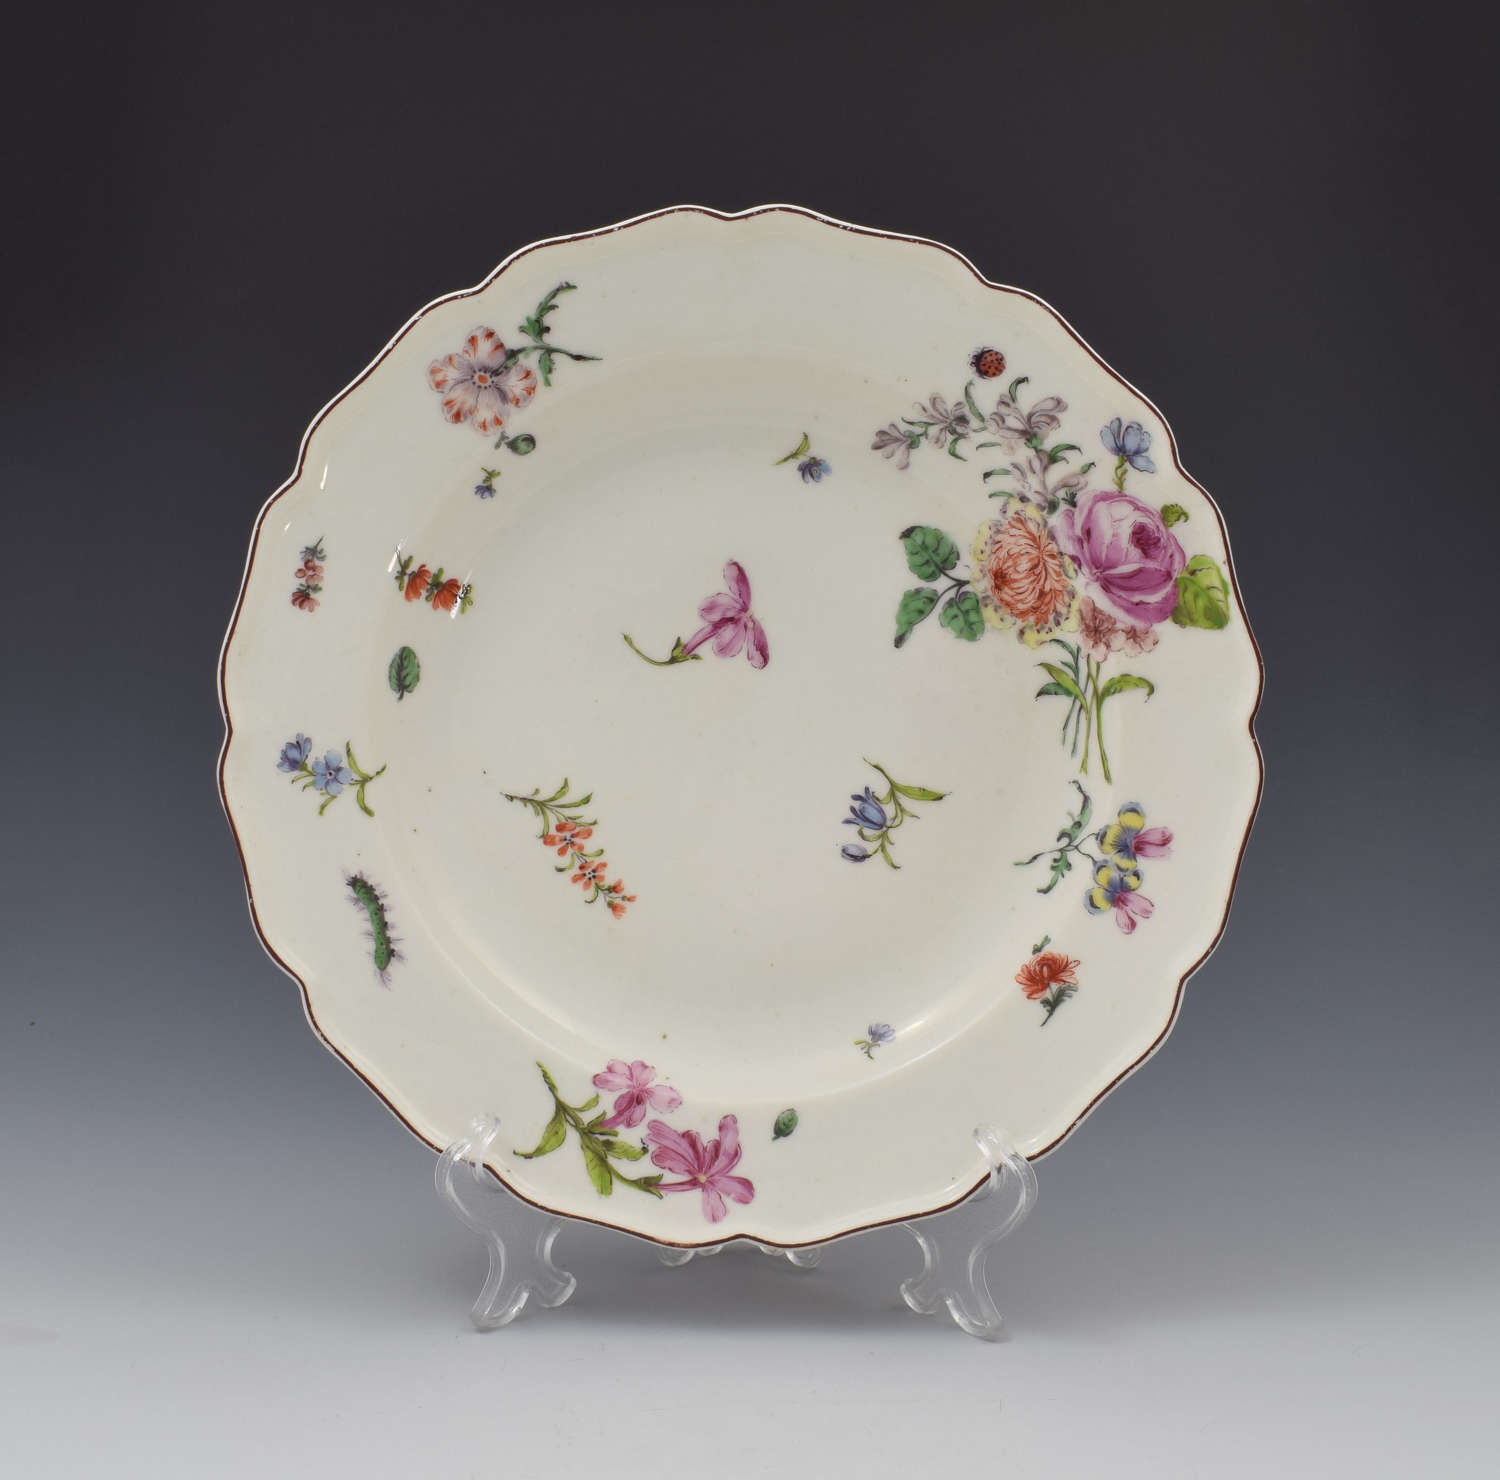 Chelsea Porcelain Red Anchor Period Floral Dessert Plate c.1753-58